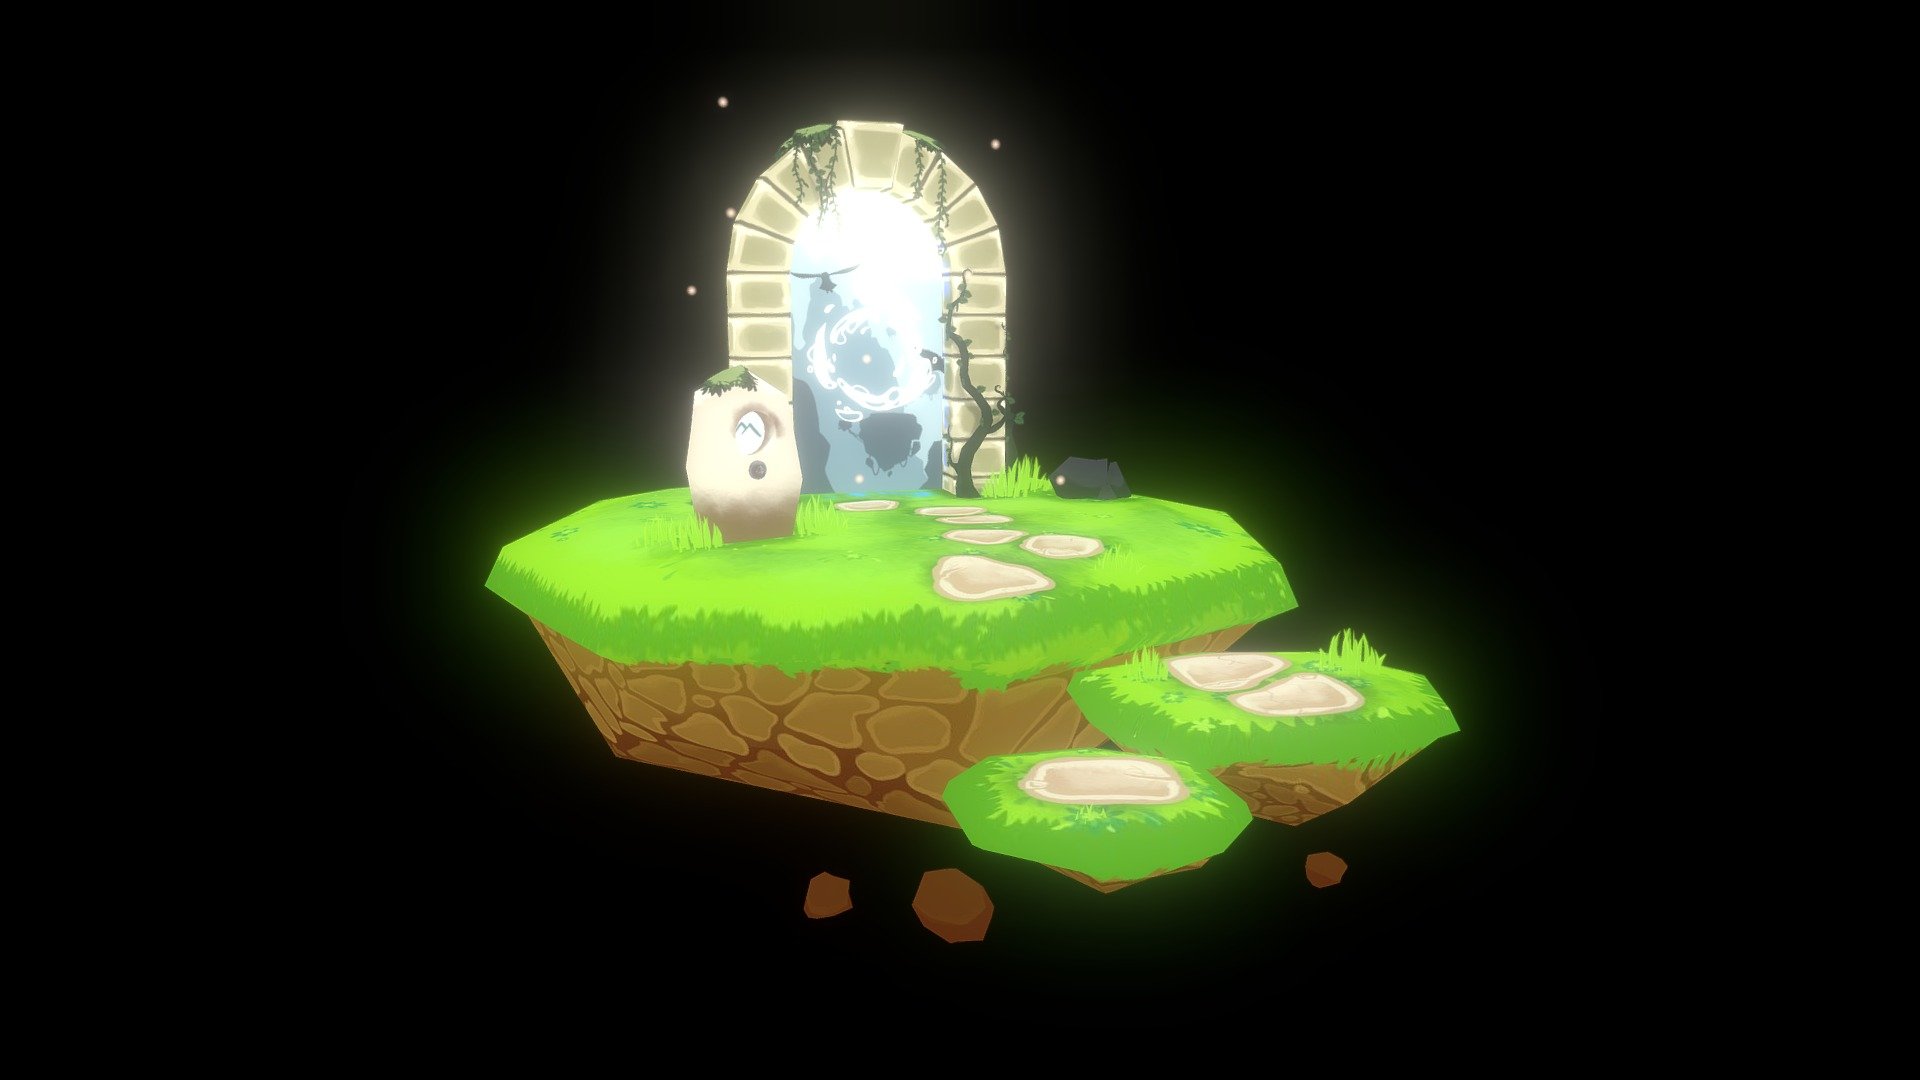 Re-textured and fixed edgepadding
Really quick and bad animation but I wanted to show some of the places the portal leads to

Inspired by Studio Ghibli and Treasure Planet - The Gateway v2.0 - 3D model by RinRainicorn 3d model